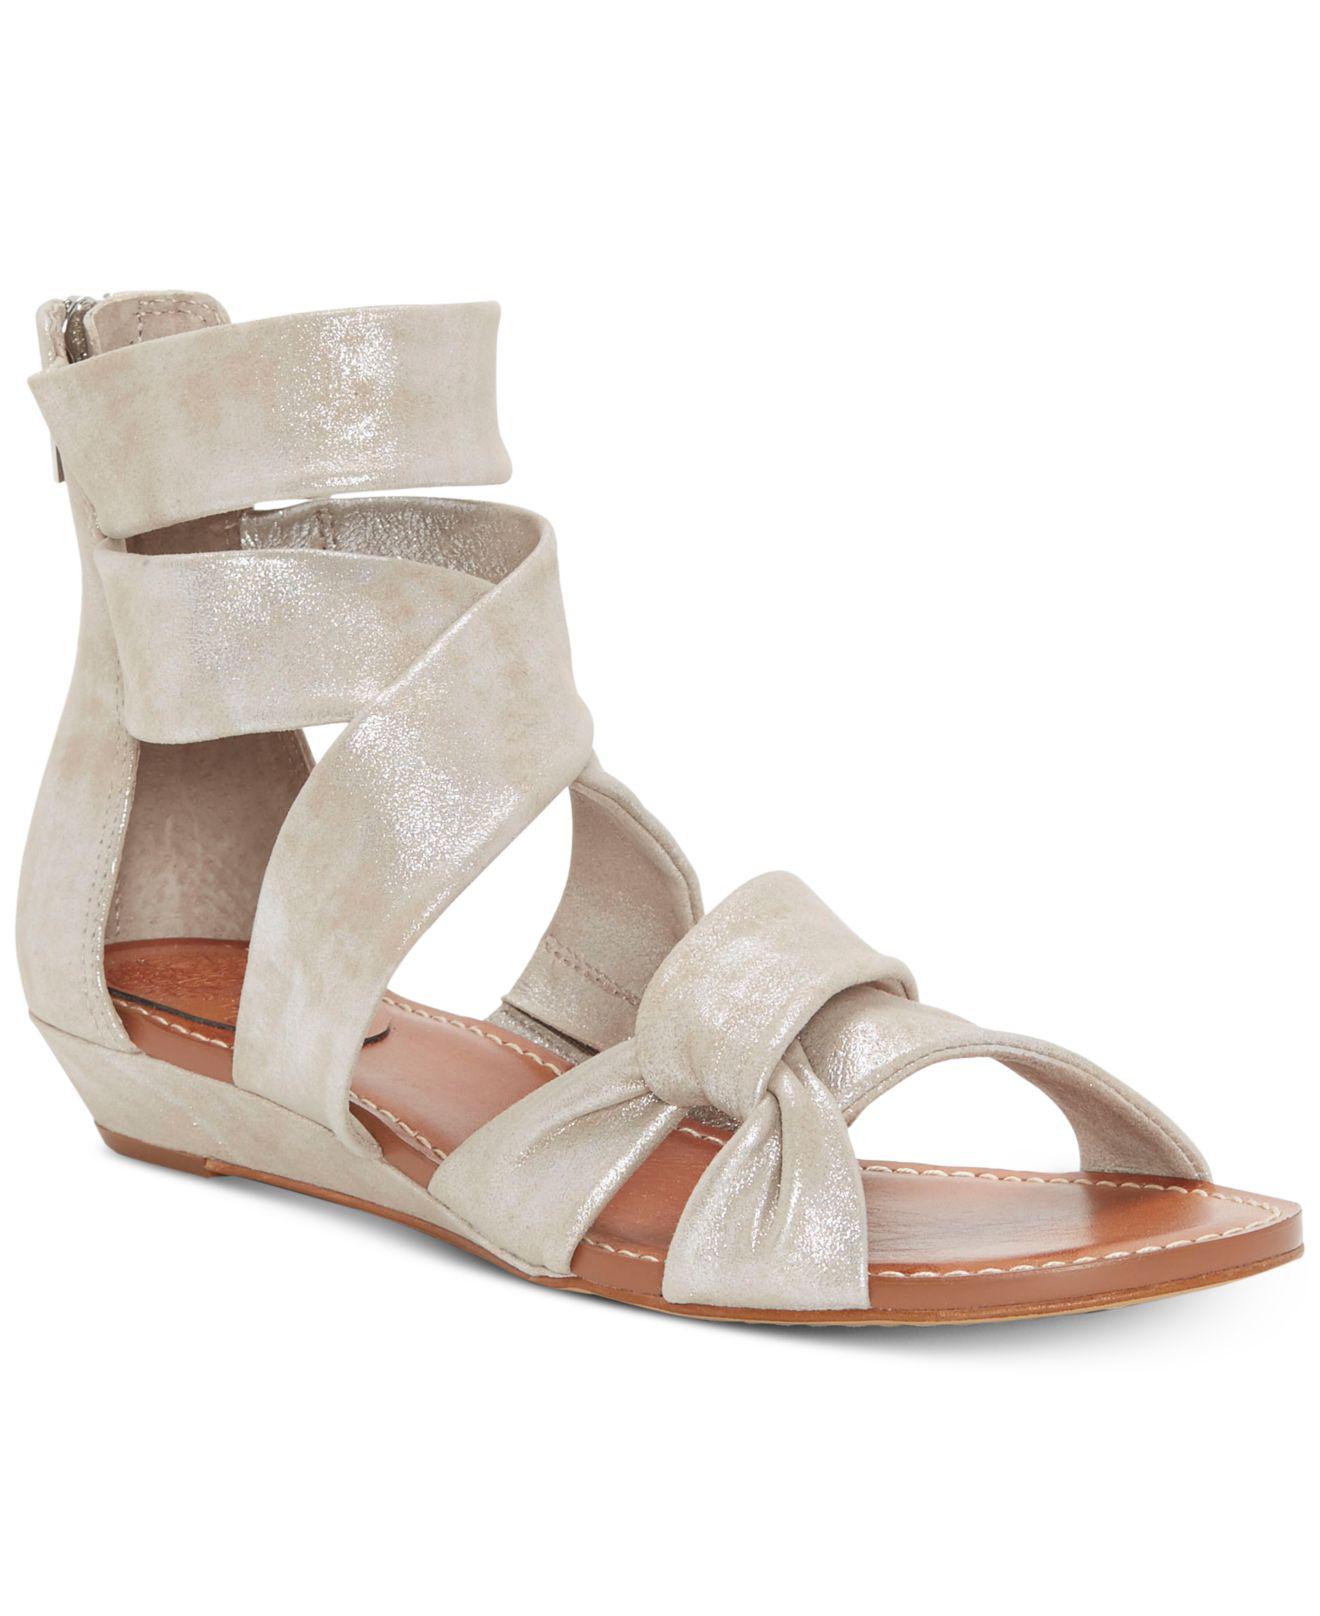 vince camuto seevina sandals